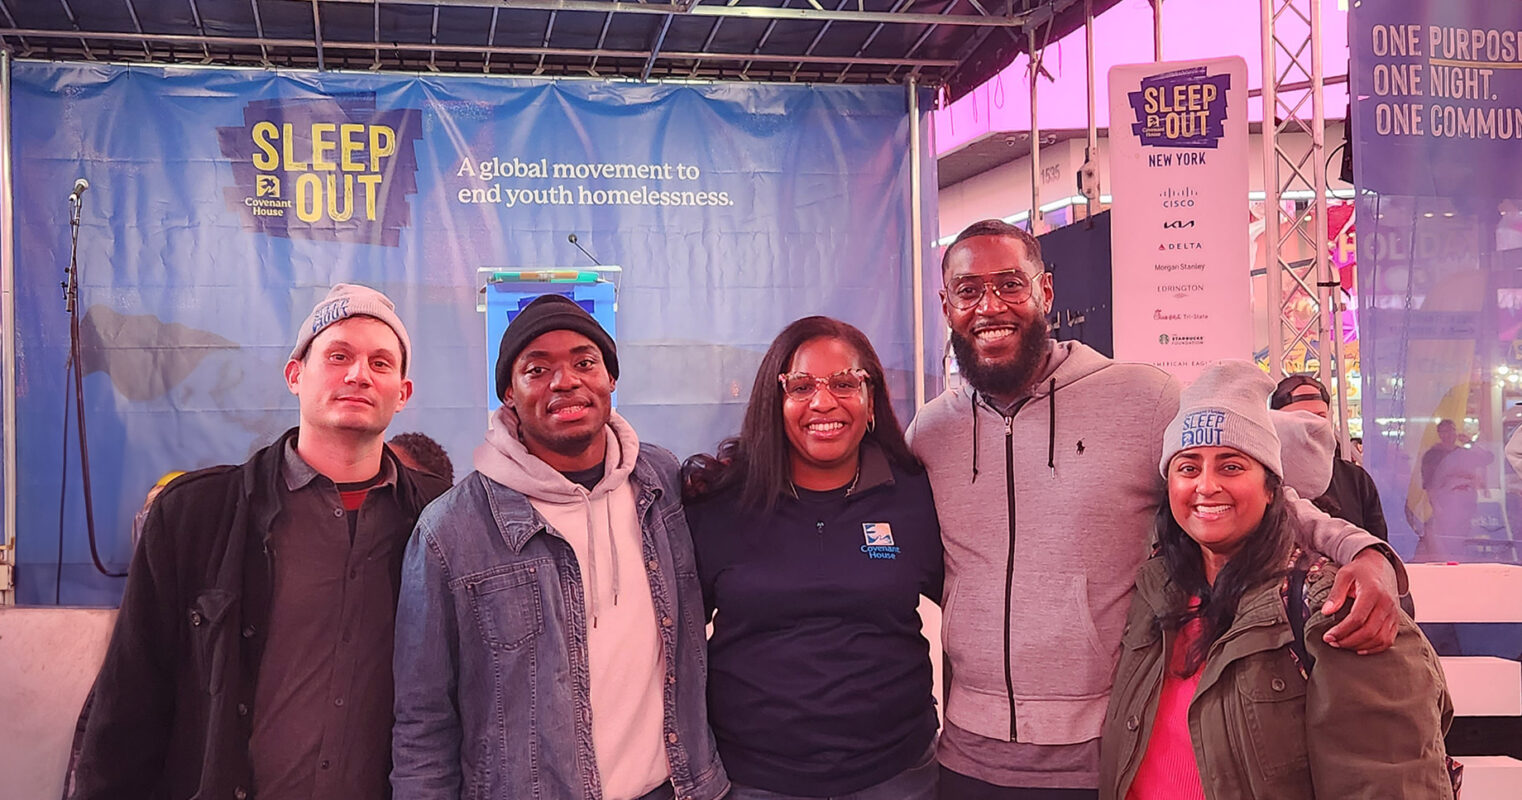 Josh Vizzi (far left) and Anjali Mathai, Director of DEI (far right) joined by members of Convent House for the annual Sleep Out iSleep Out: A Global Movement to End Youth Homelessness